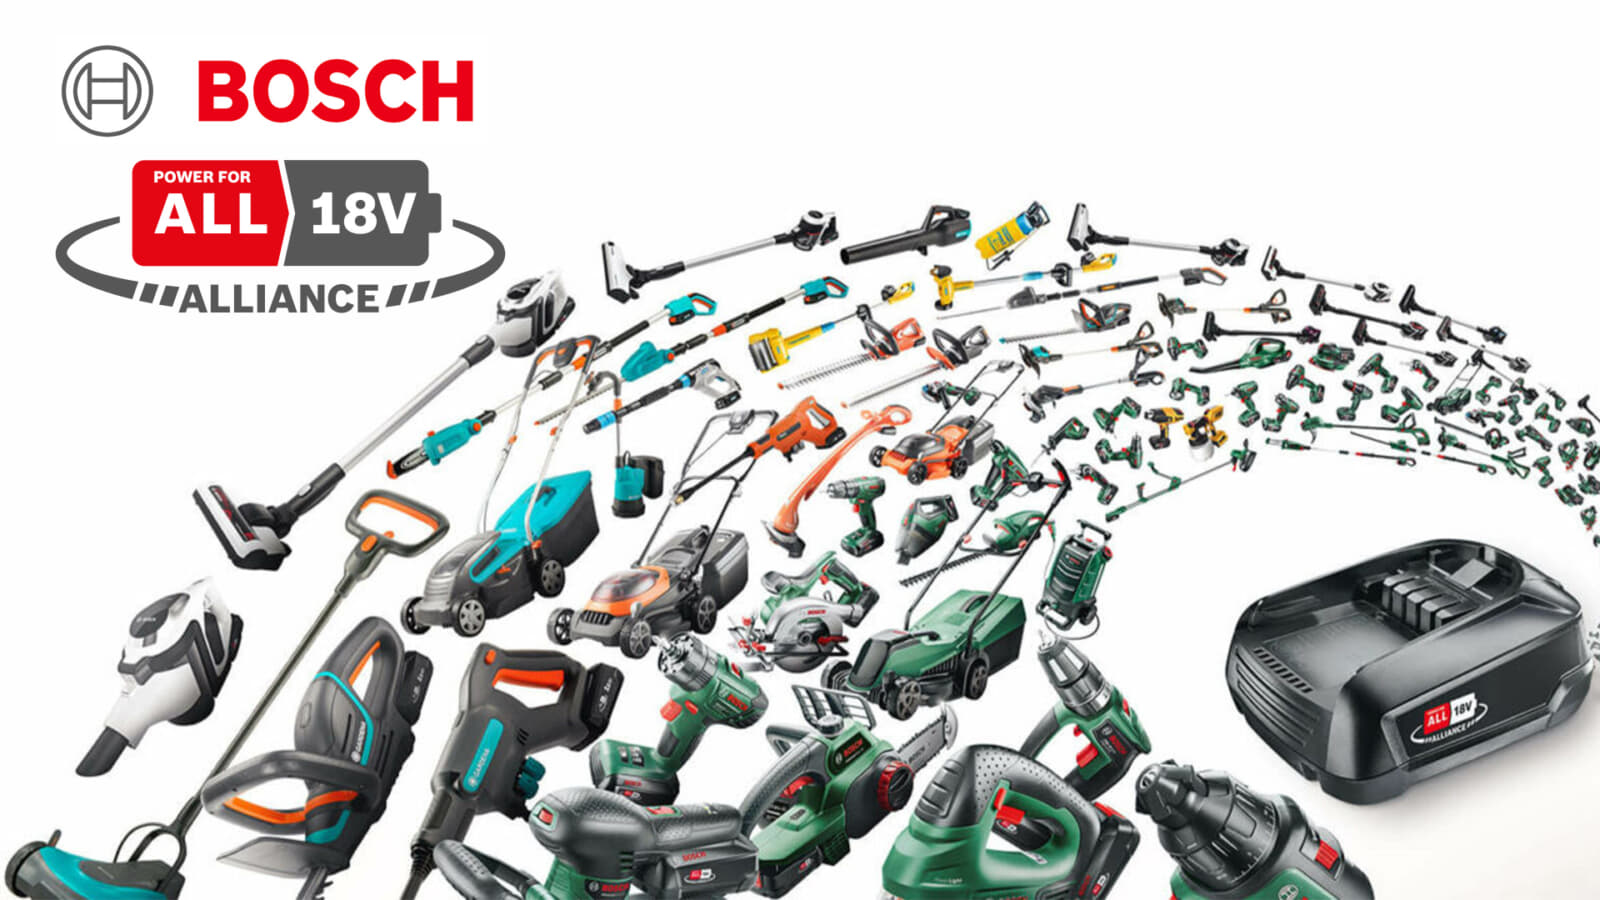 BOSCH (ボッシュ) POWER FOR ALL ALLIANCE、家庭向け工具の共通バッテリー規格